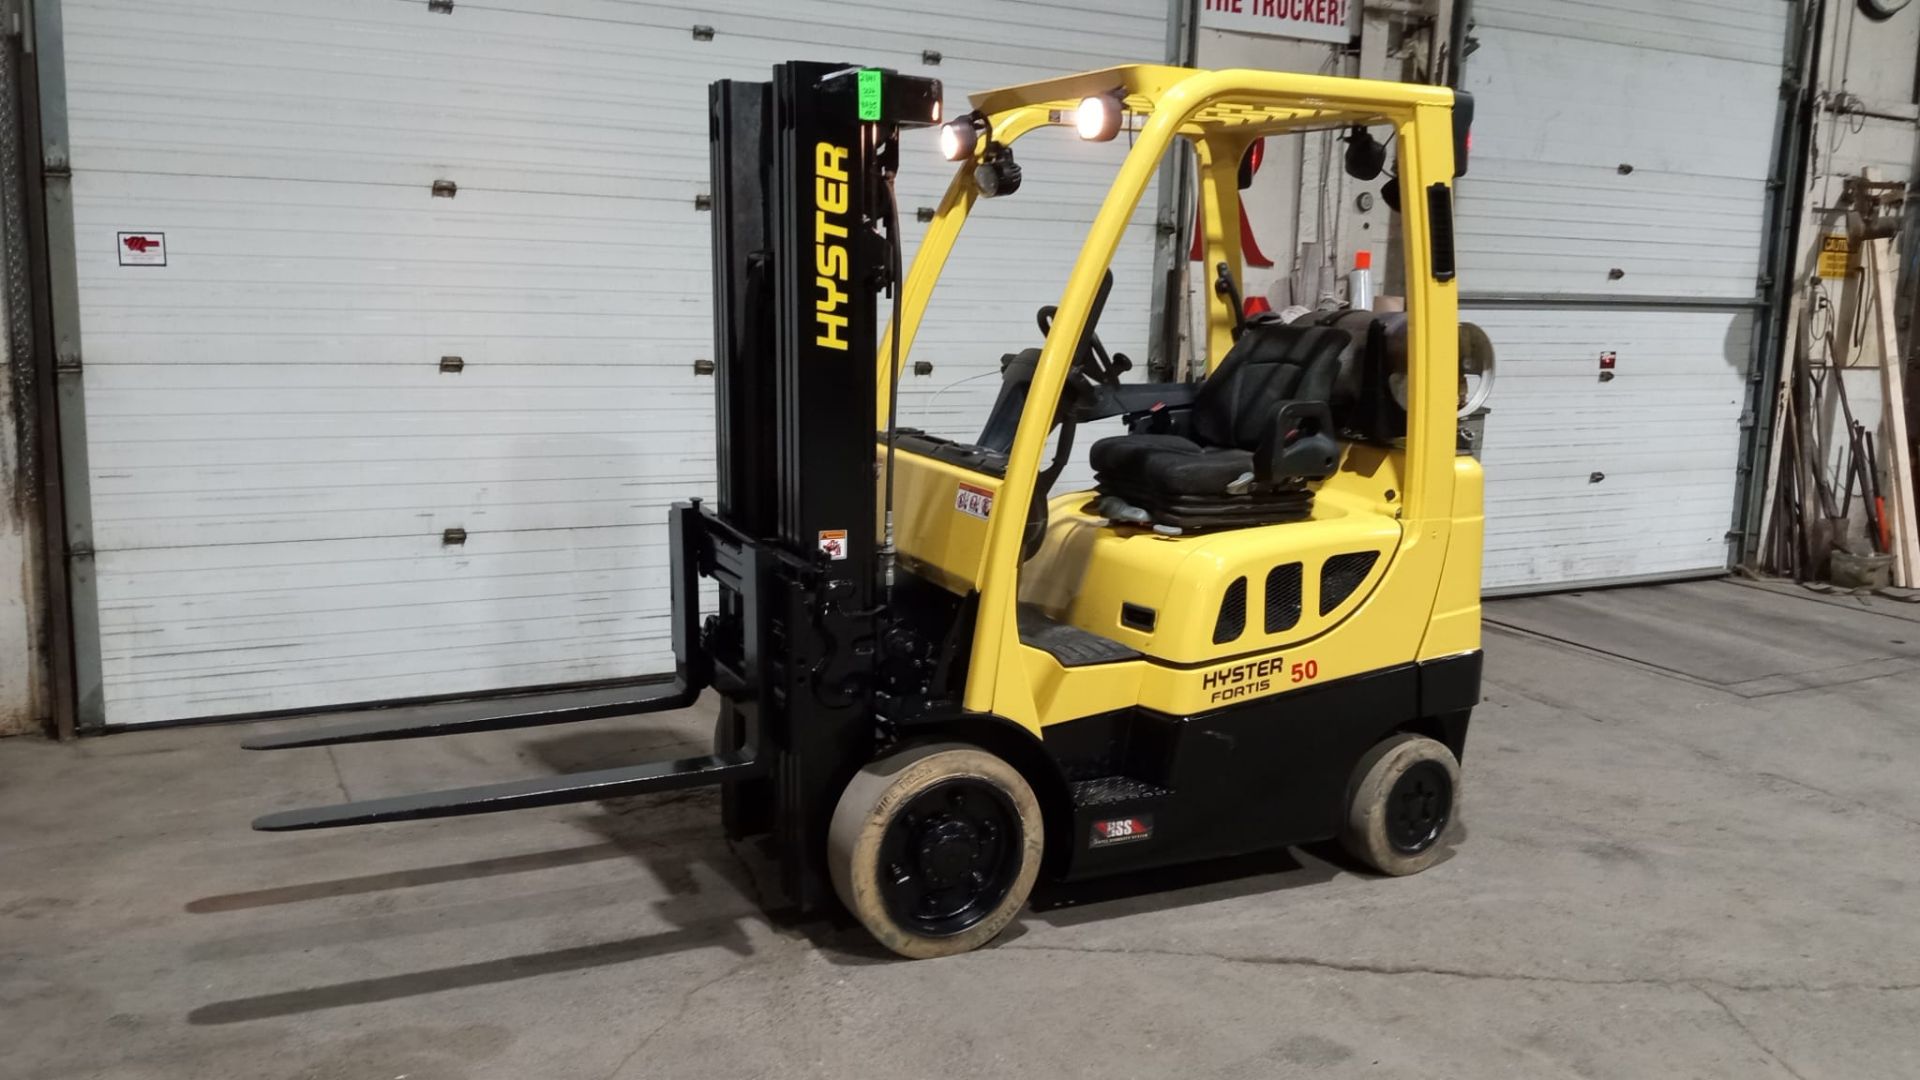 2016 HYSTER 5,000lbs Capacity LPG (Propane) Forklift with sideshift & 3-STAGE MAST & Non Marking - Image 2 of 5